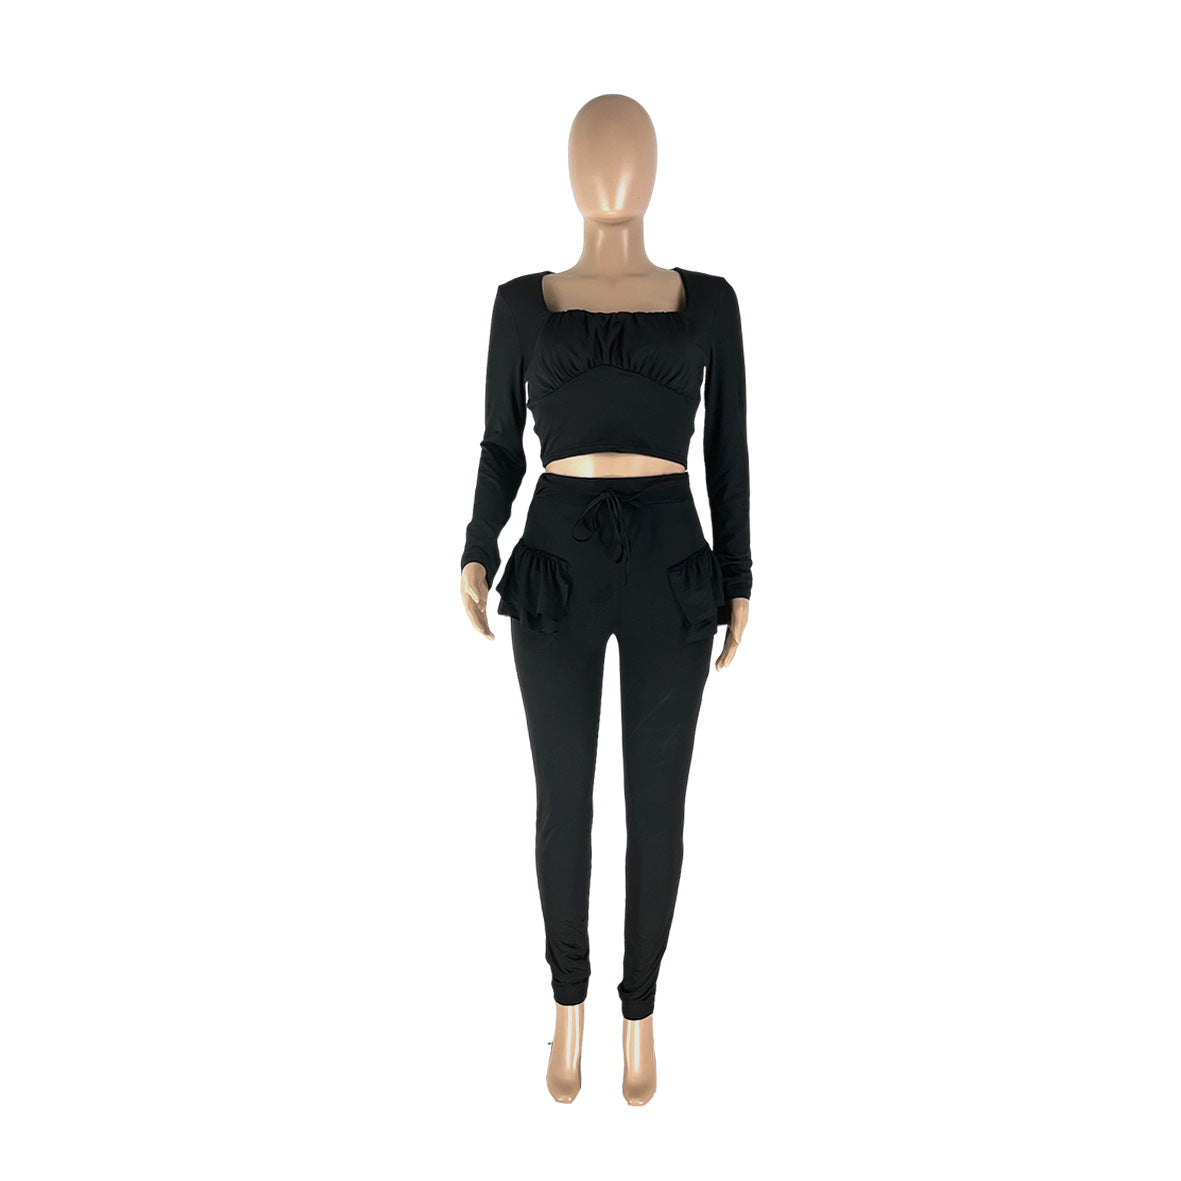 Two Piece Long Sleeve Tight Top and Ruffle High Waist Pant Set